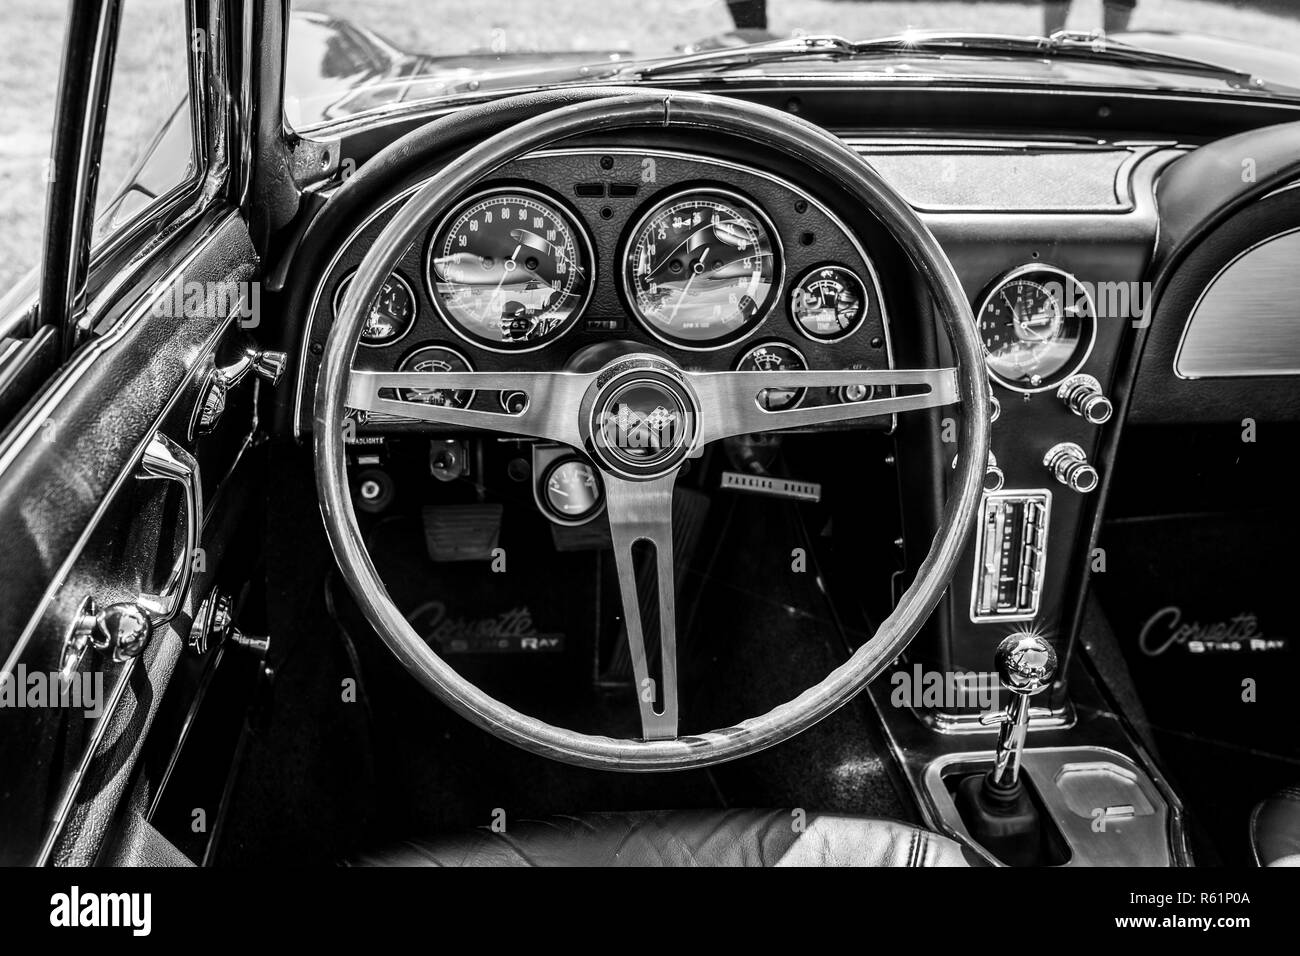 PAAREN IM GLIEN, GERMANY - MAY 19, 2018: Interior of a sports car Chevrolet Corvette Sting Ray (C2). Black and white. Die Oldtimer Show 2018. Stock Photo